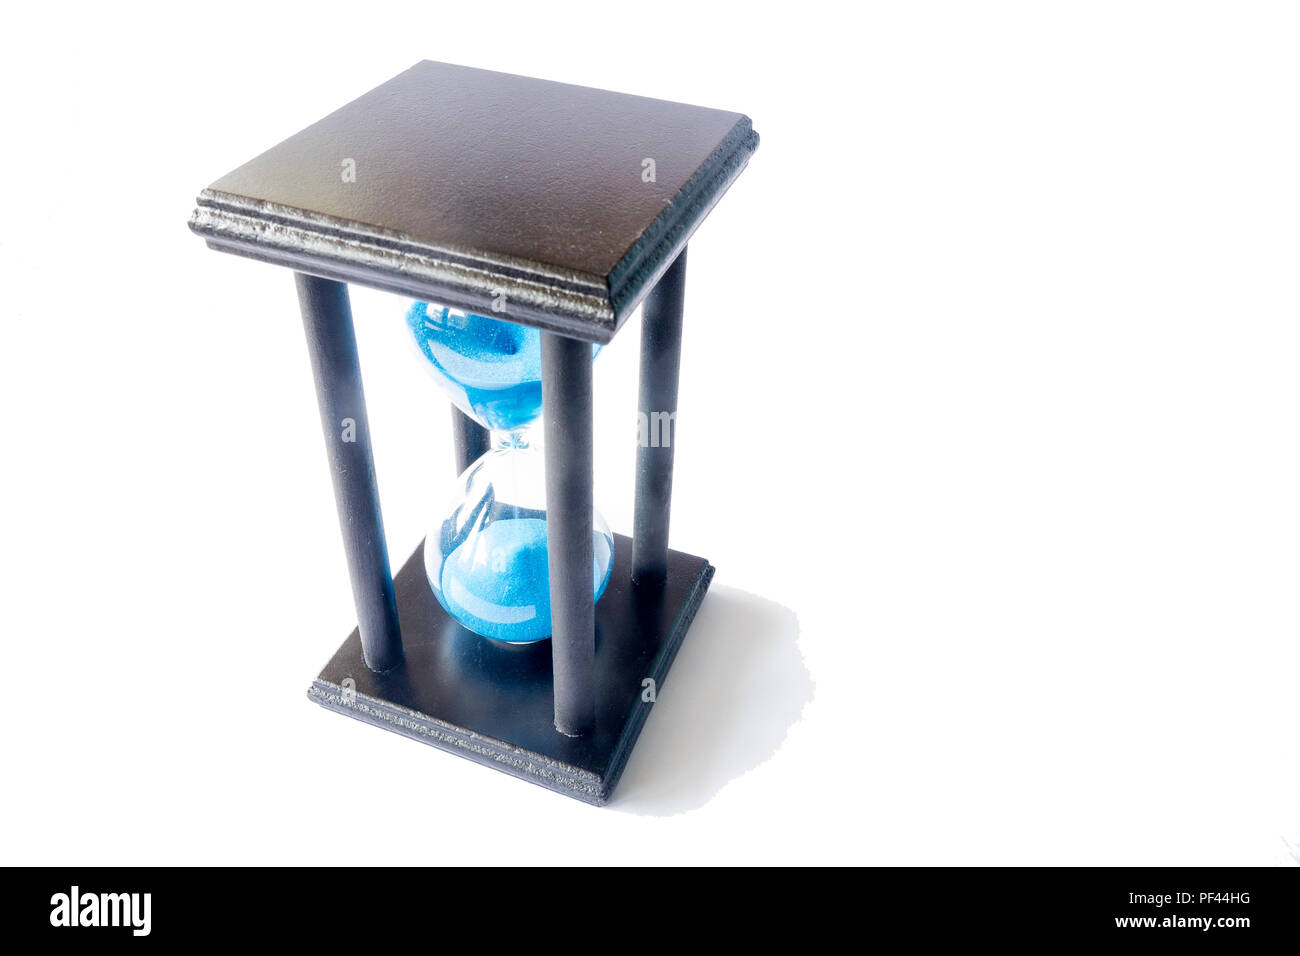 An elevated view of an hourglass against a white background. Stock Photo